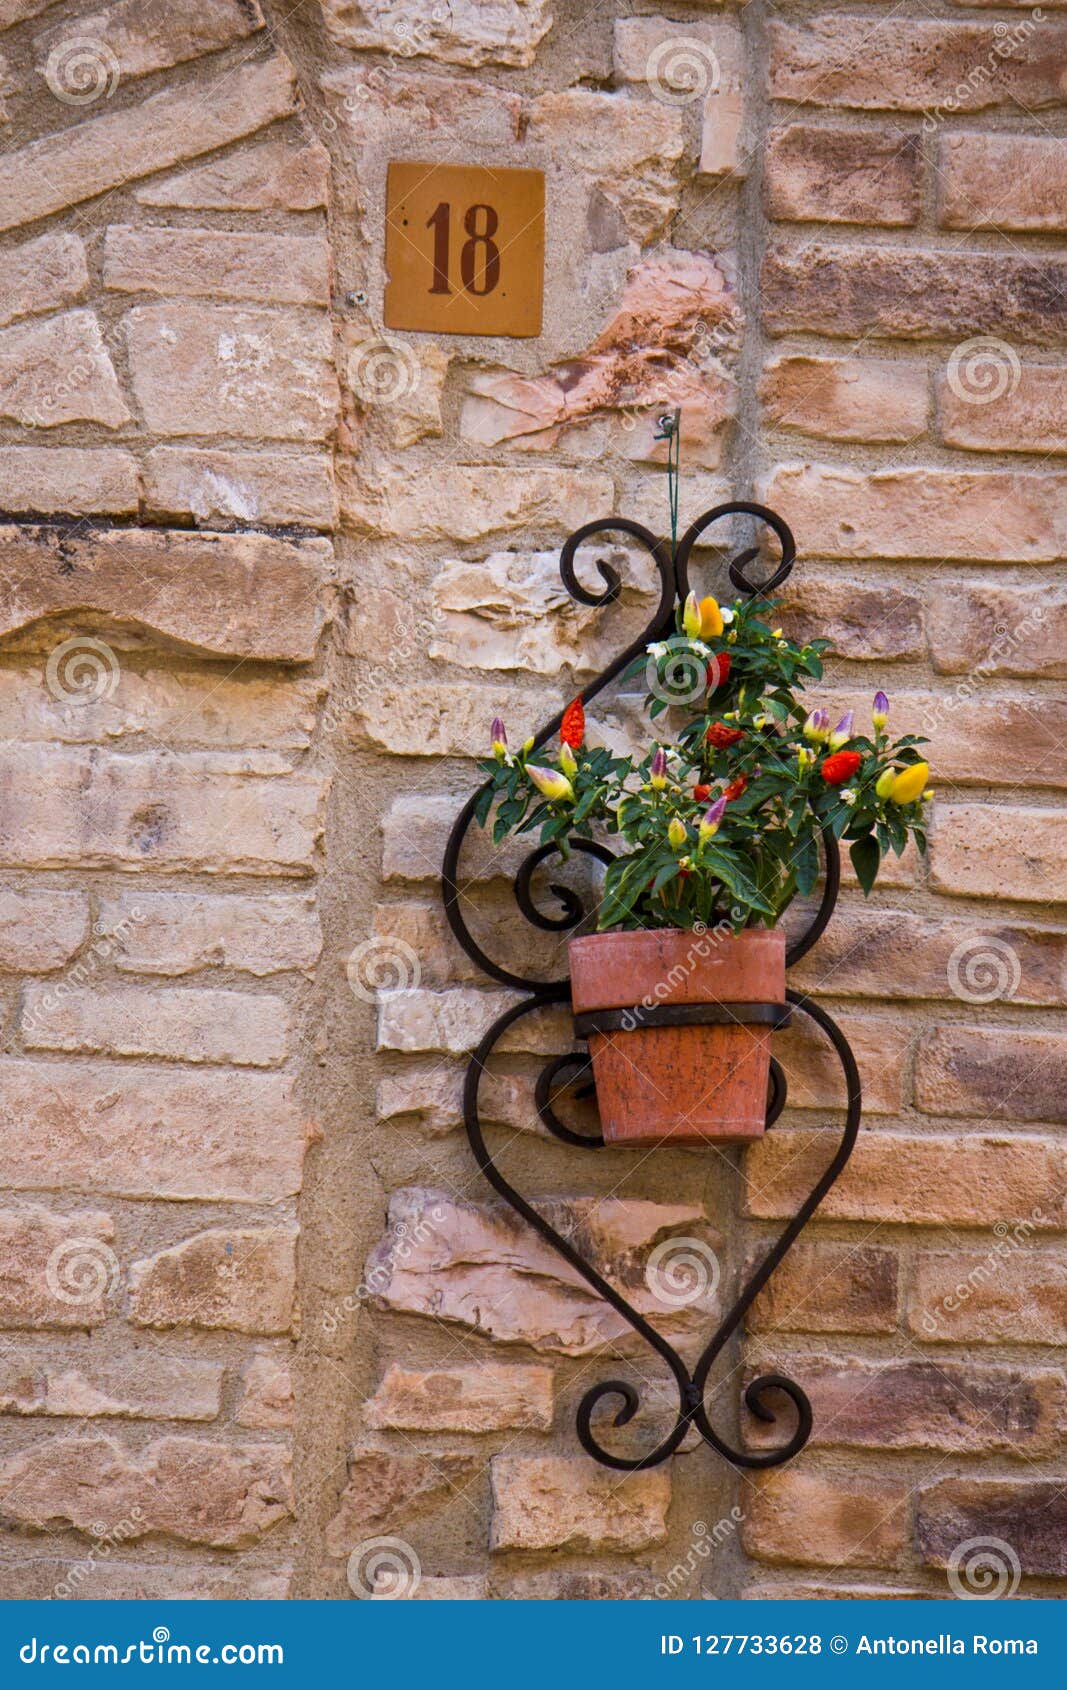 floral detail on the wall in assisi